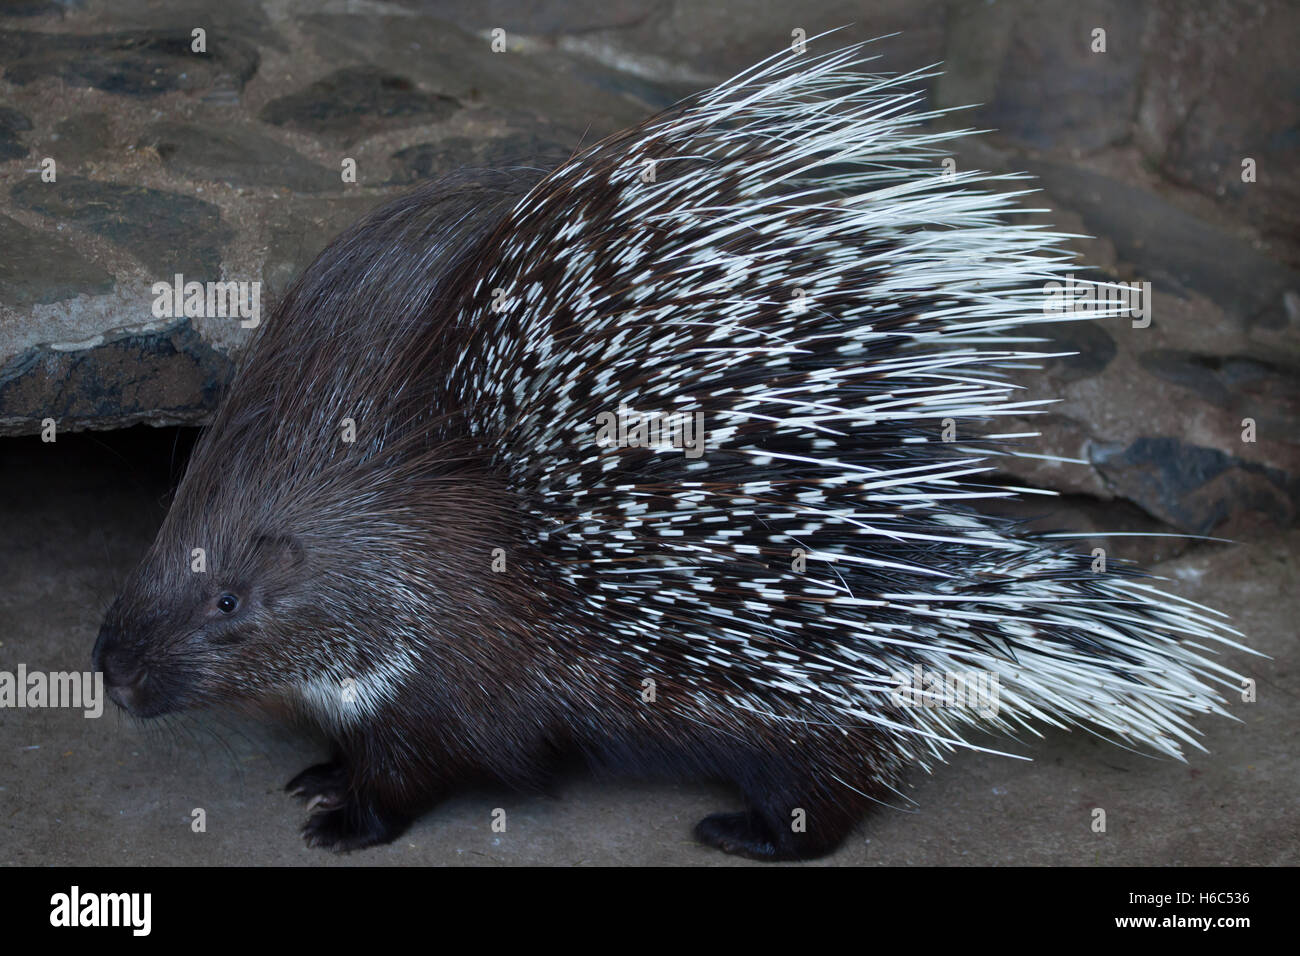 Indian crested porcupine (Hystrix indica), also known as the Indian porcupine. Wildlife animal. Stock Photo